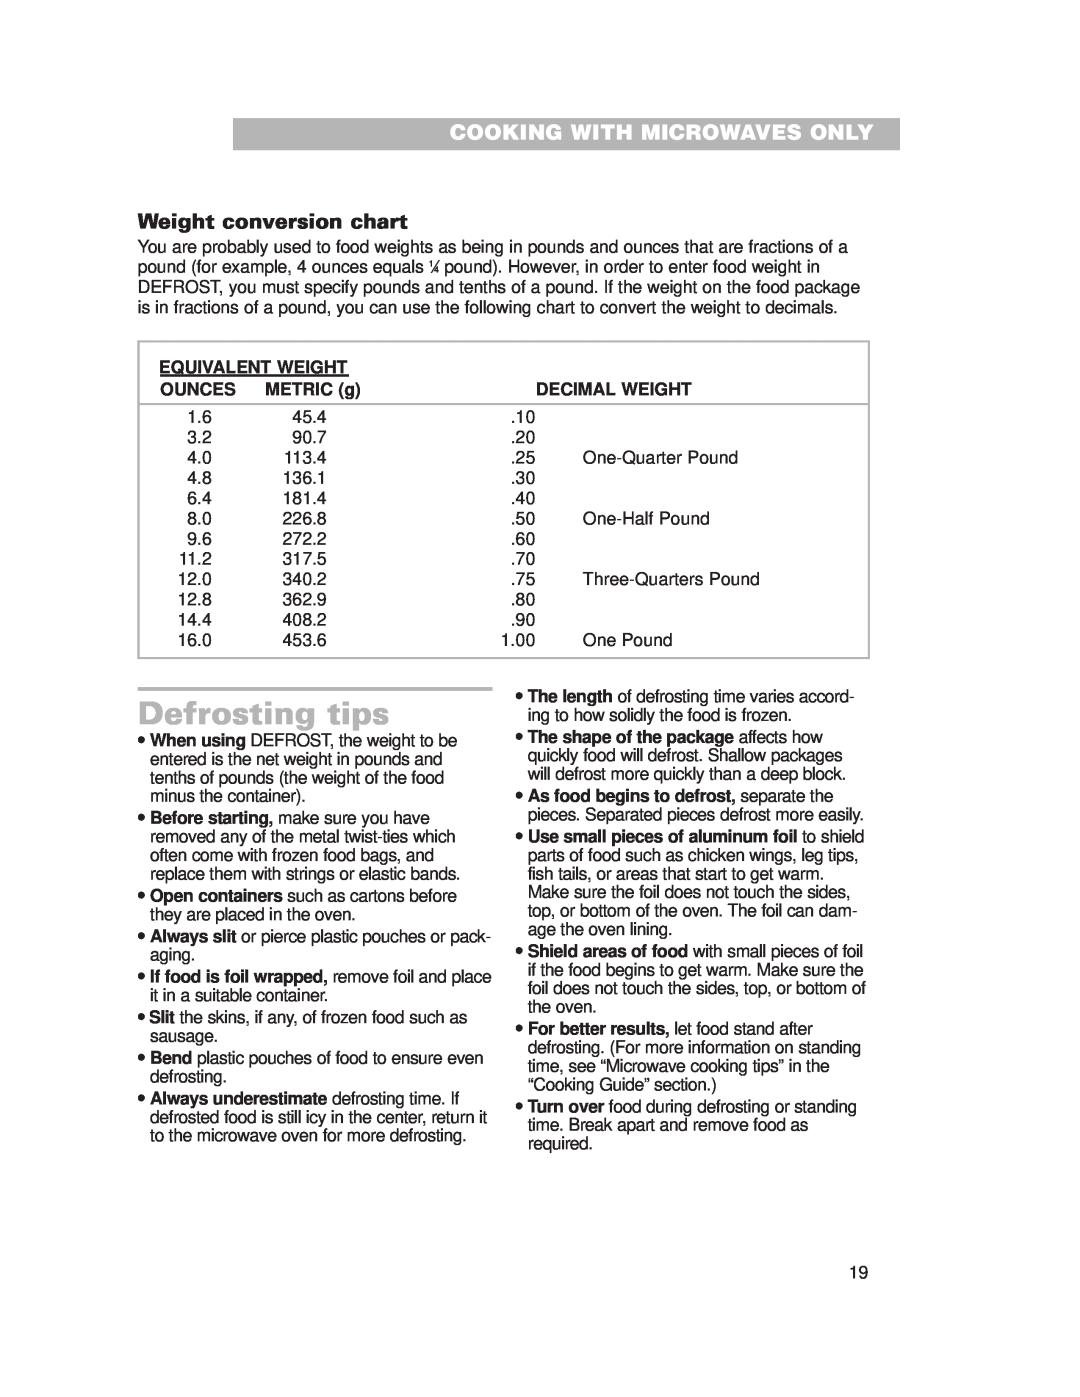 Whirlpool CMT102SG installation instructions Defrosting tips, Weight conversion chart, Cooking With Microwaves Only 